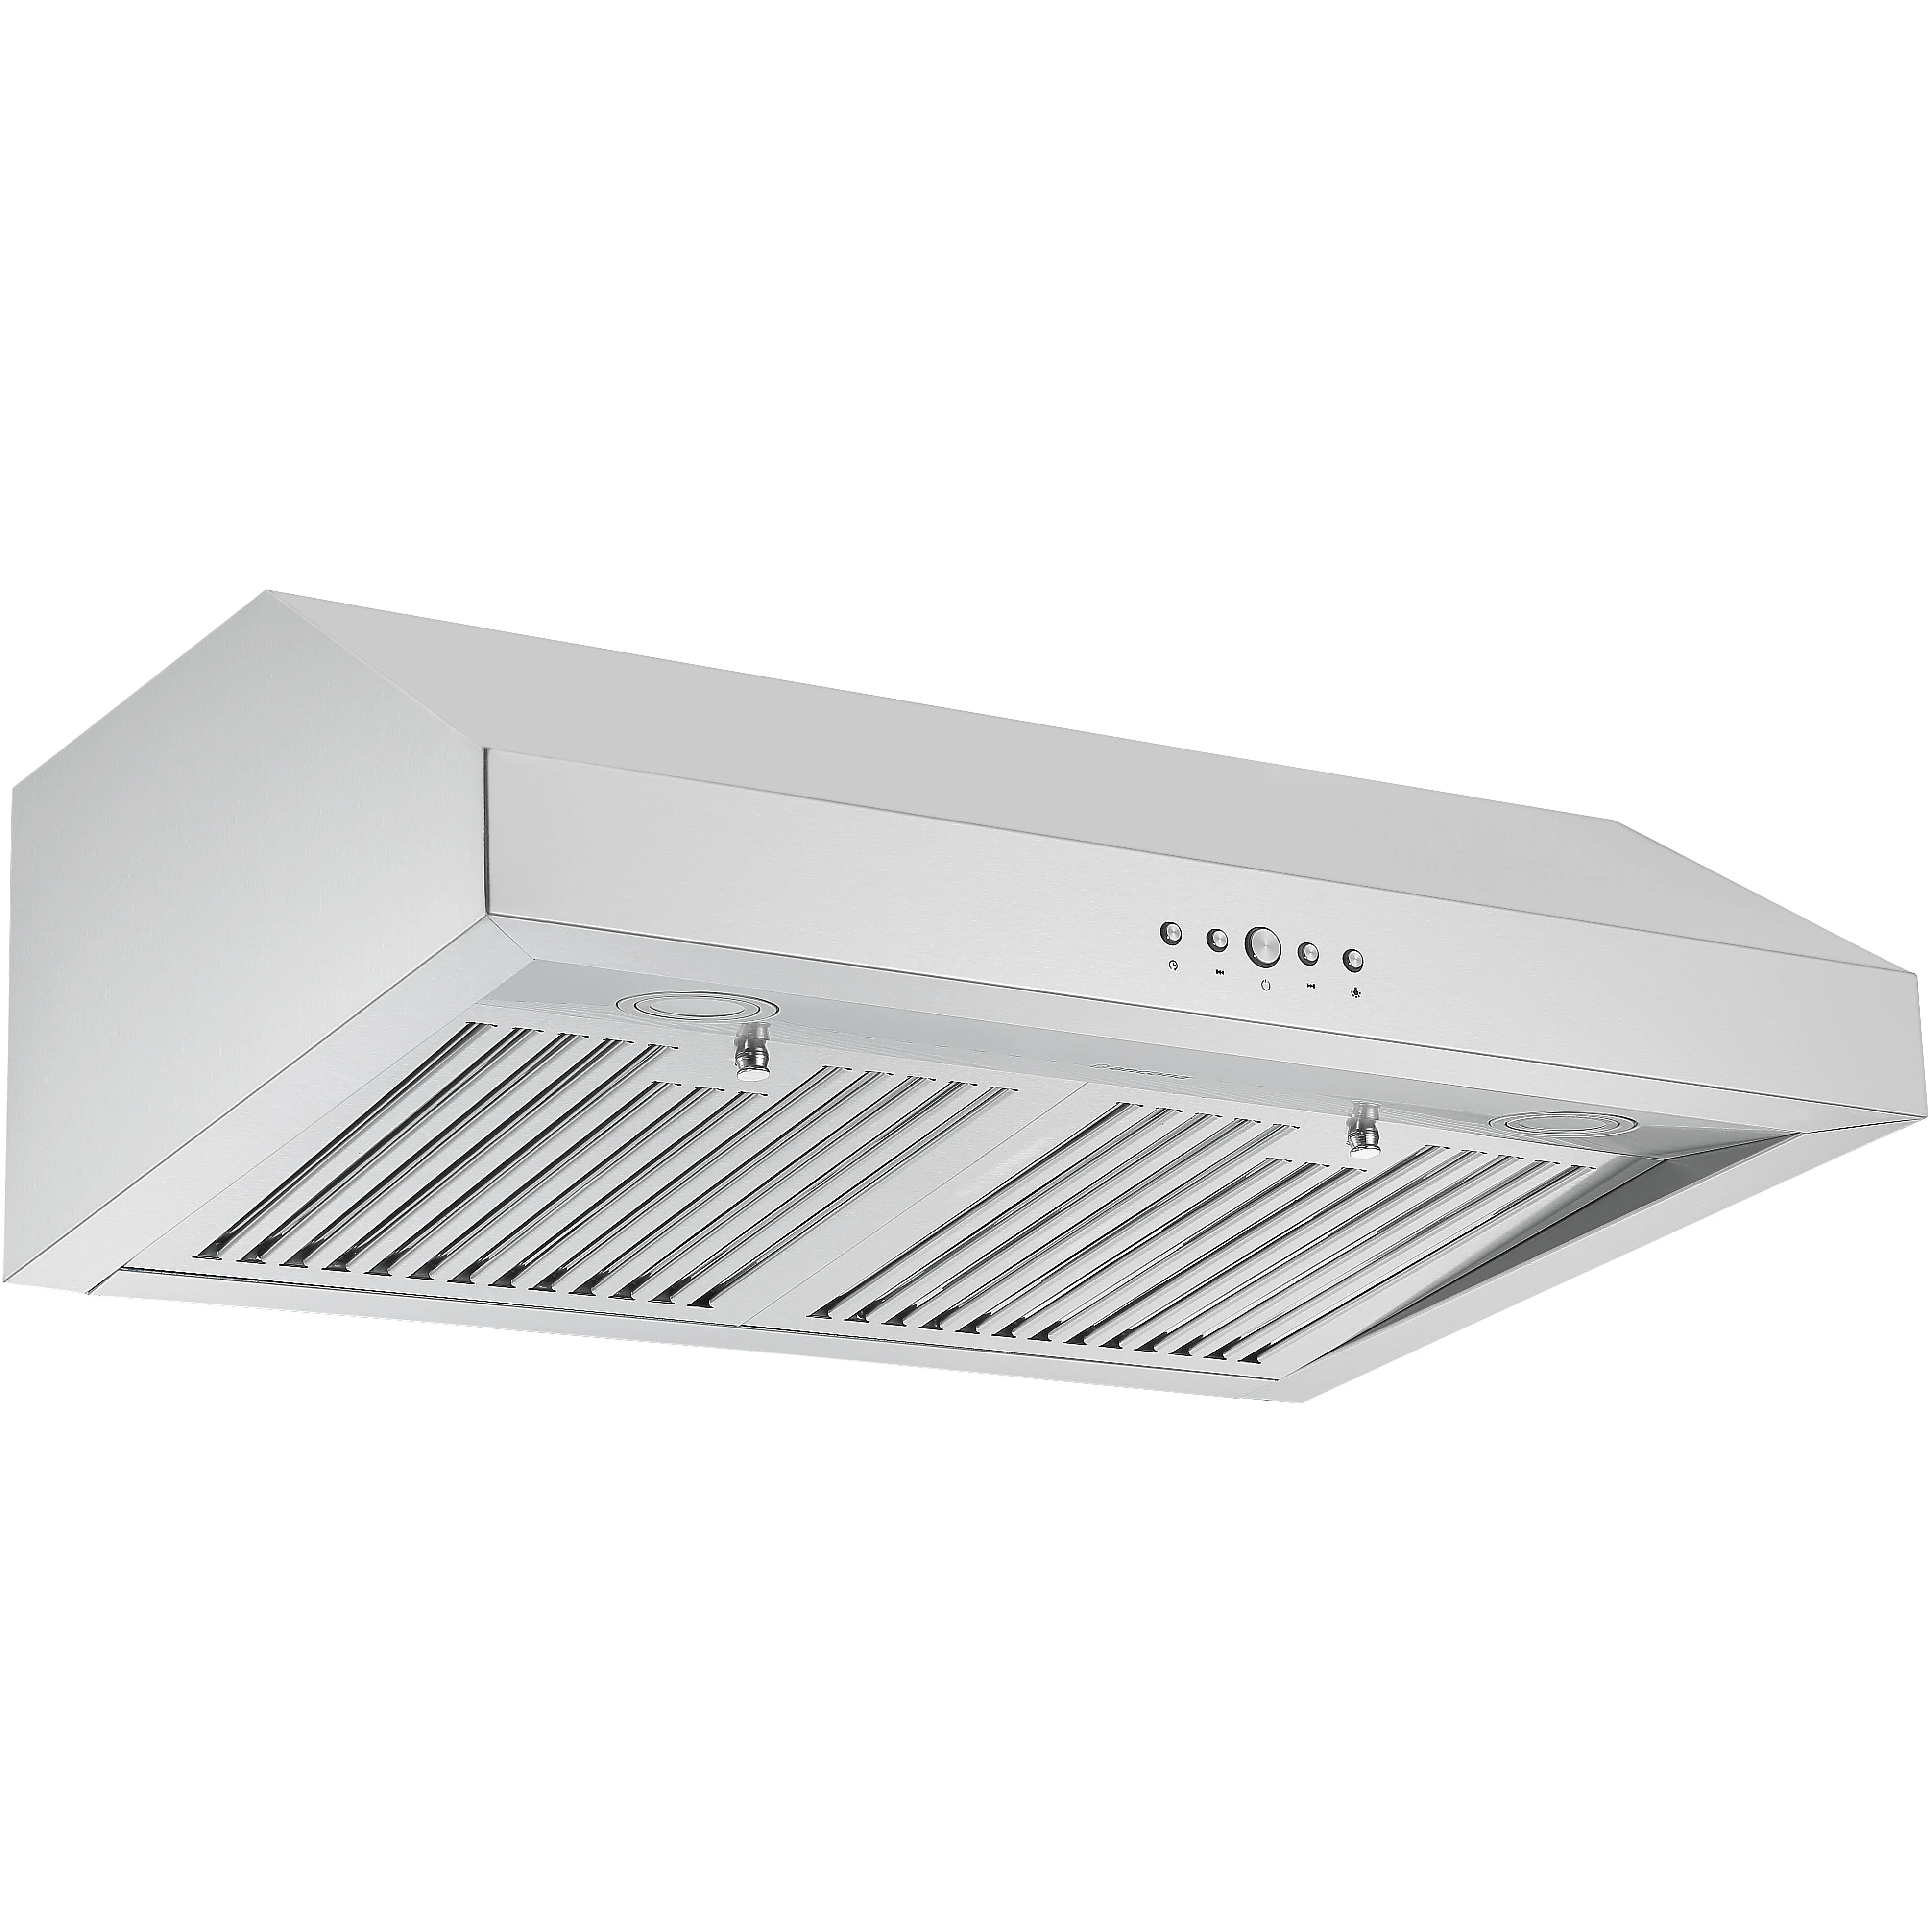 Ancona AN-1807 30 in. Stainless Steel Ducted Under Cabinet Range Hood